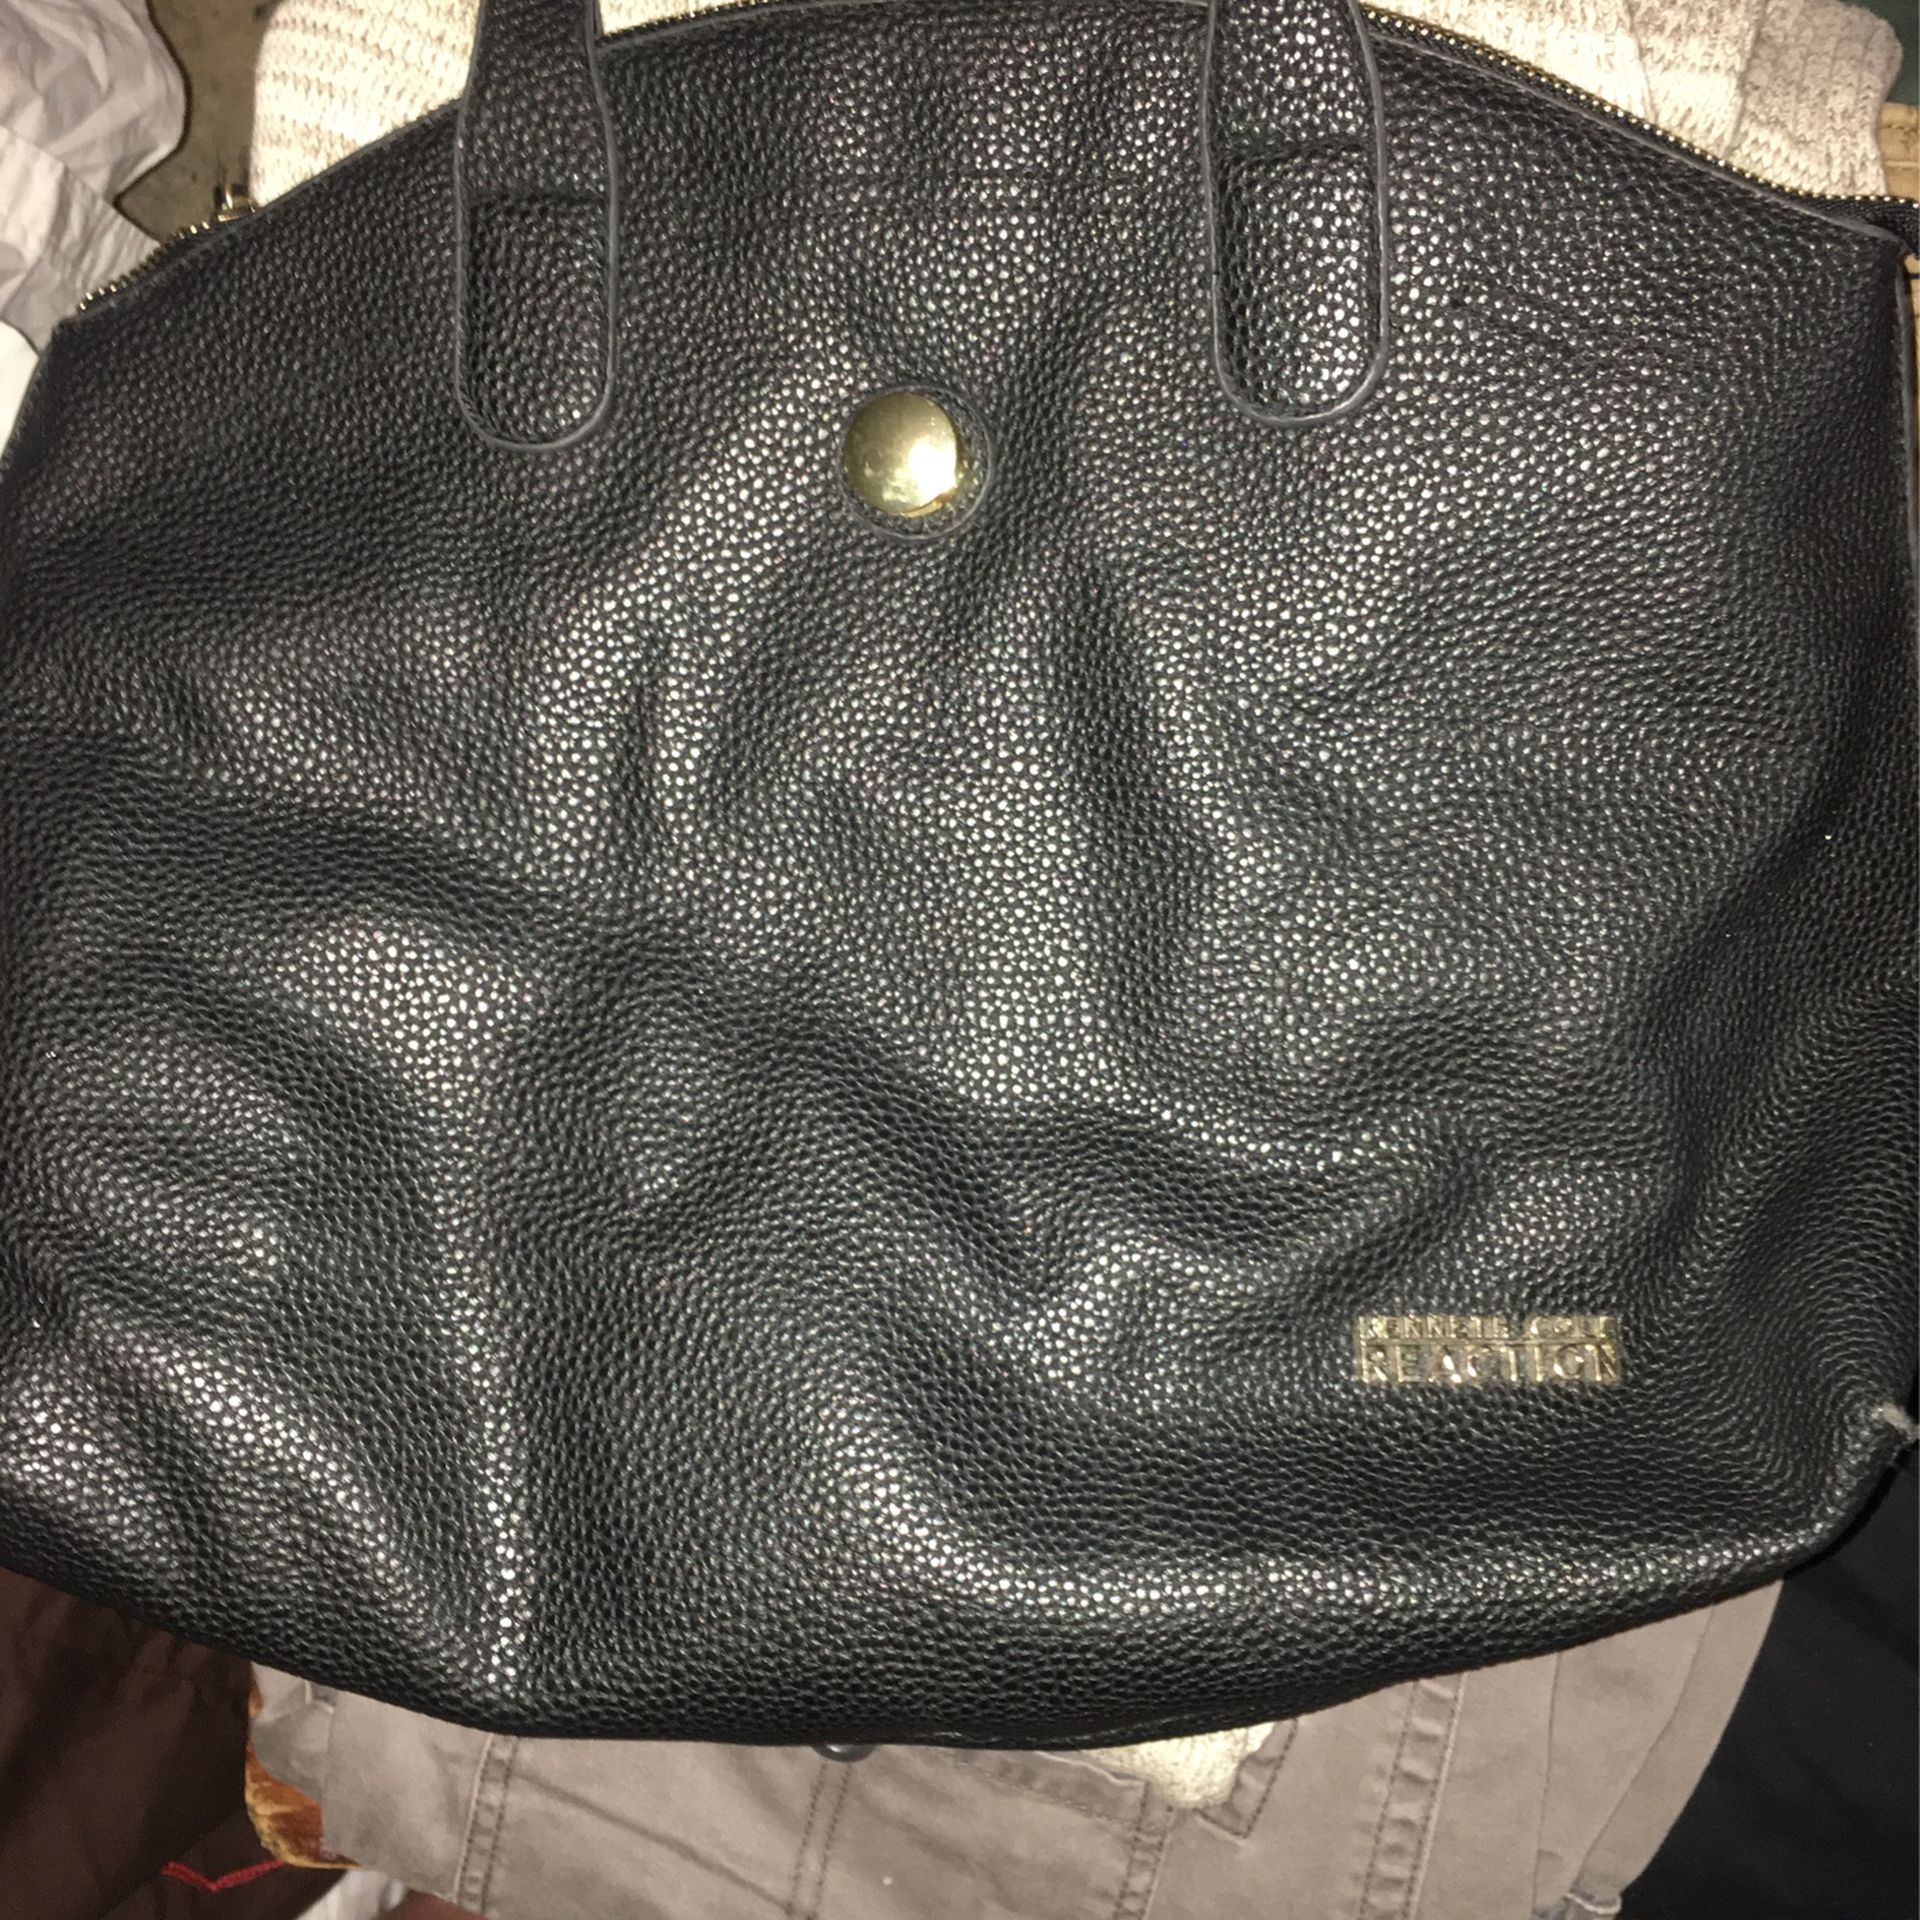 Large Kenneth Cole Reaction Purse 